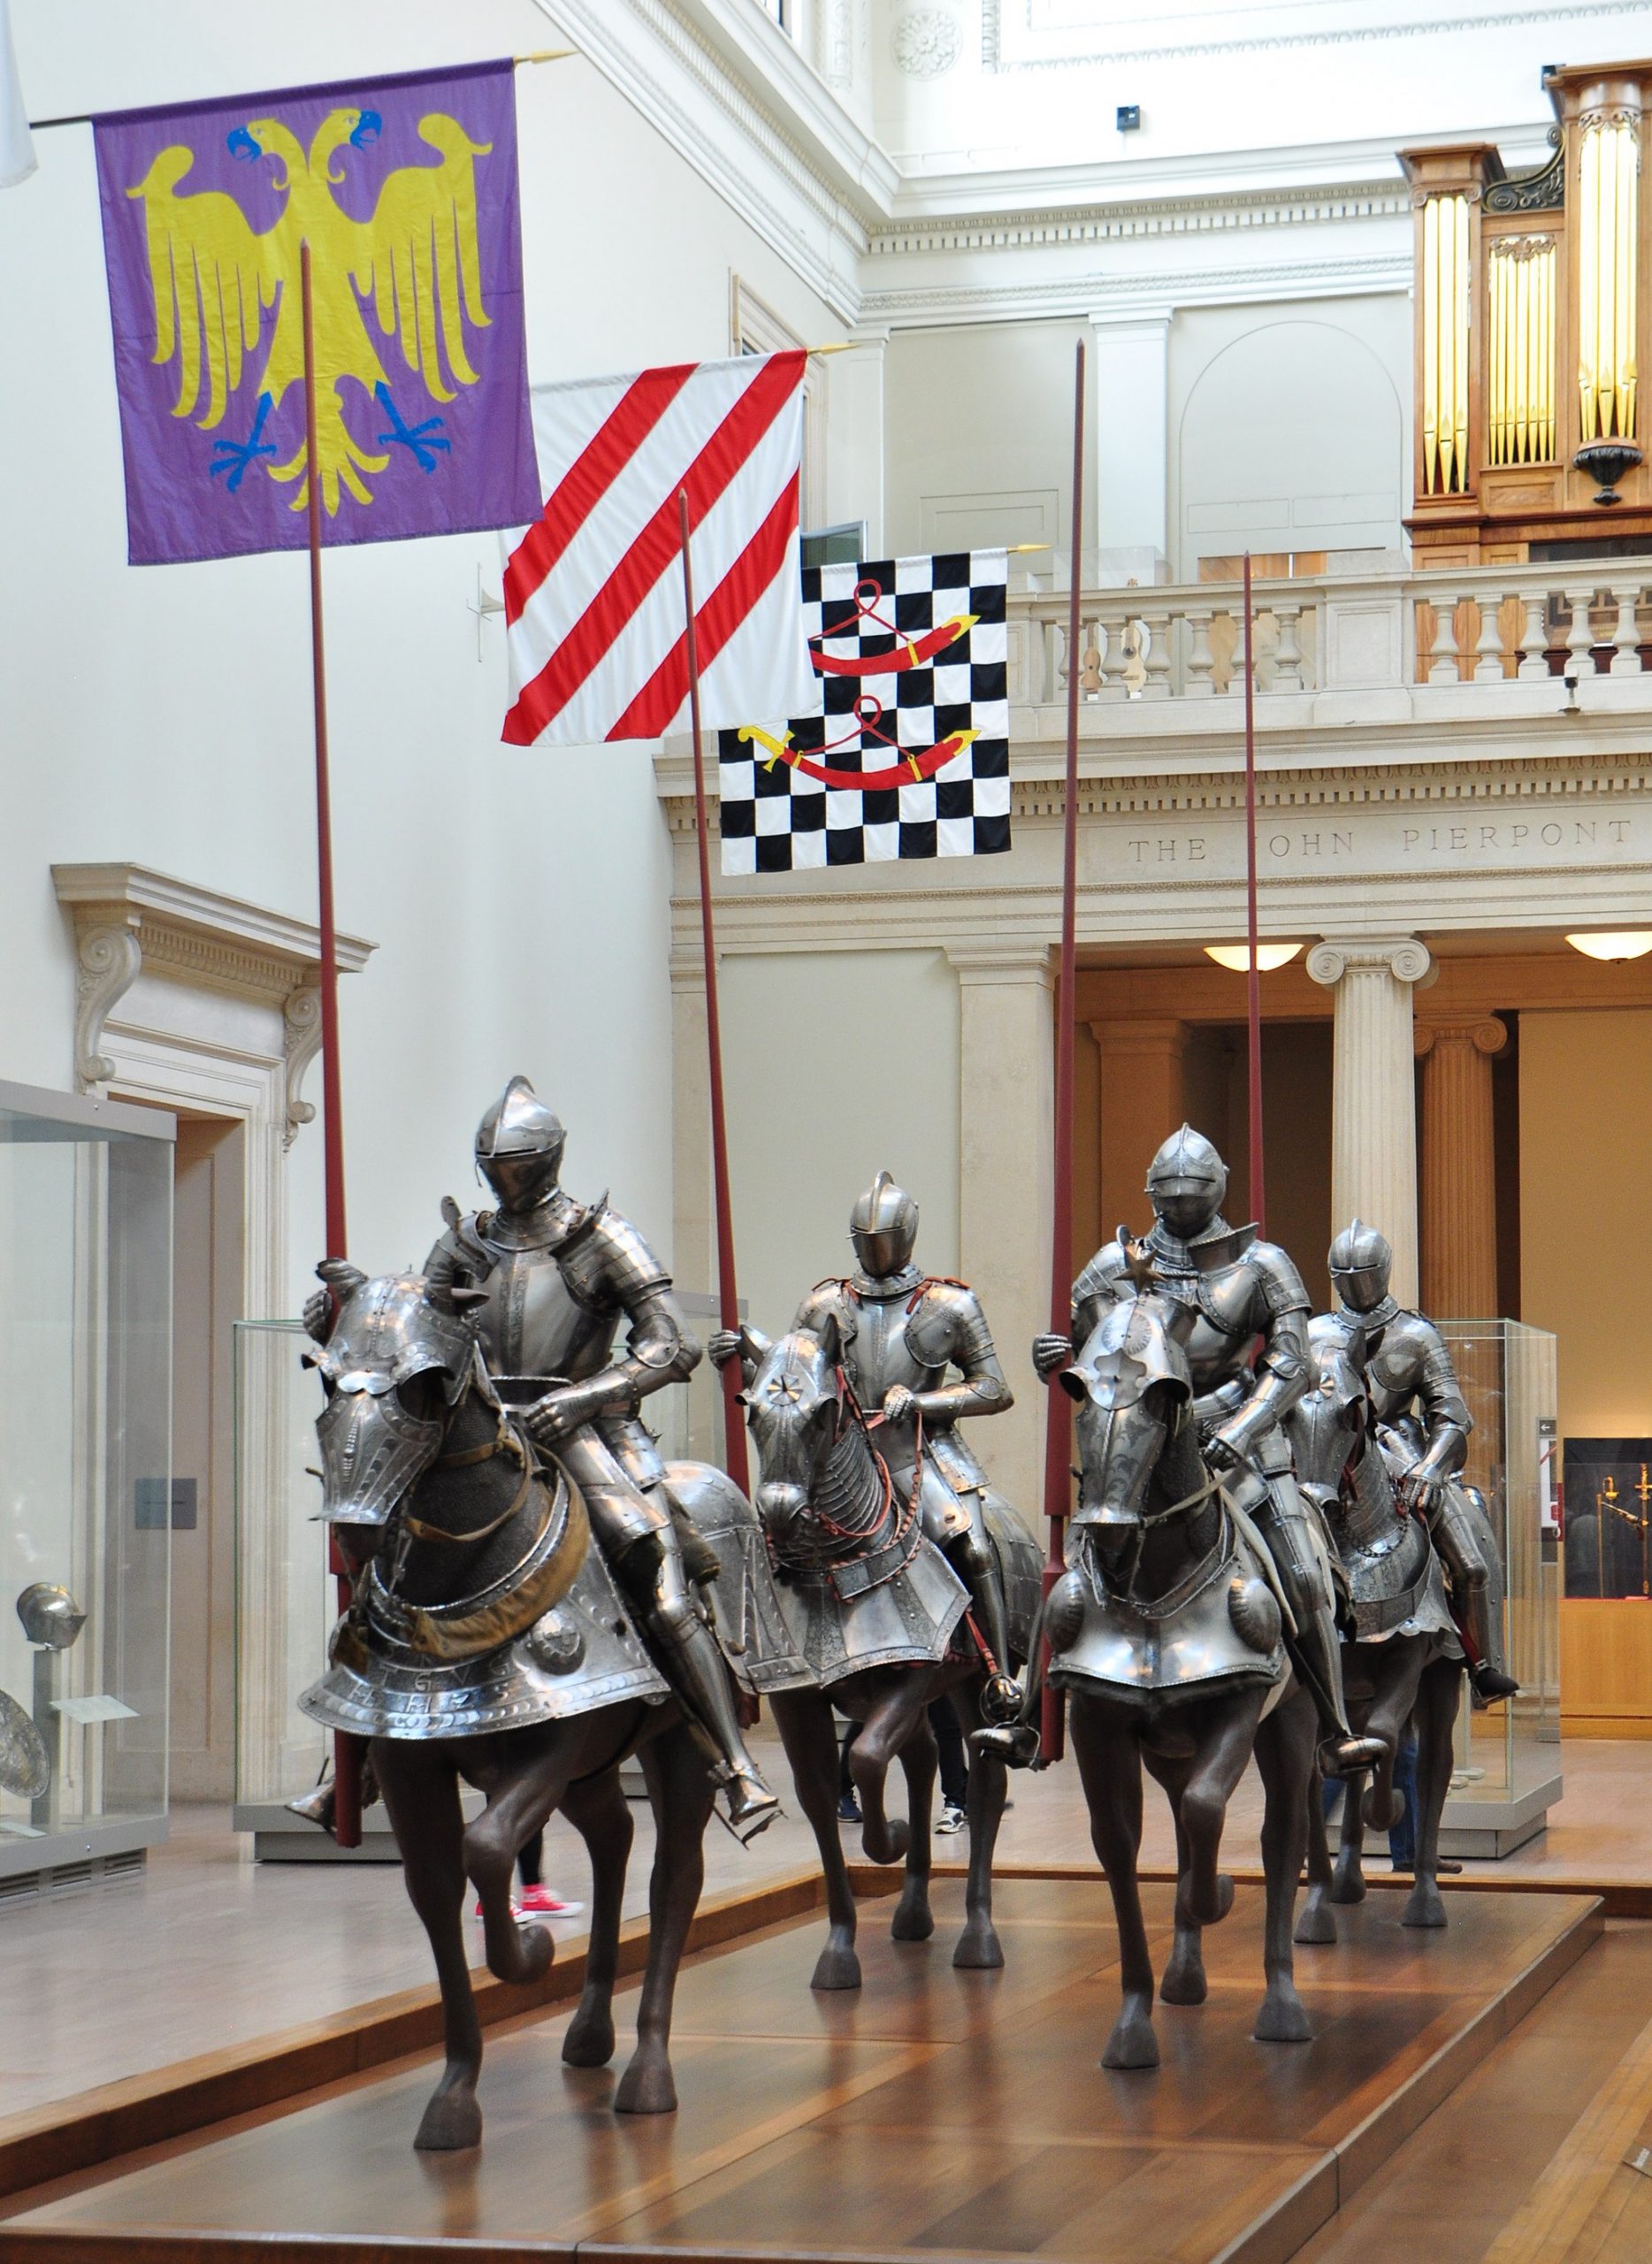 Medieval Knights in Armor